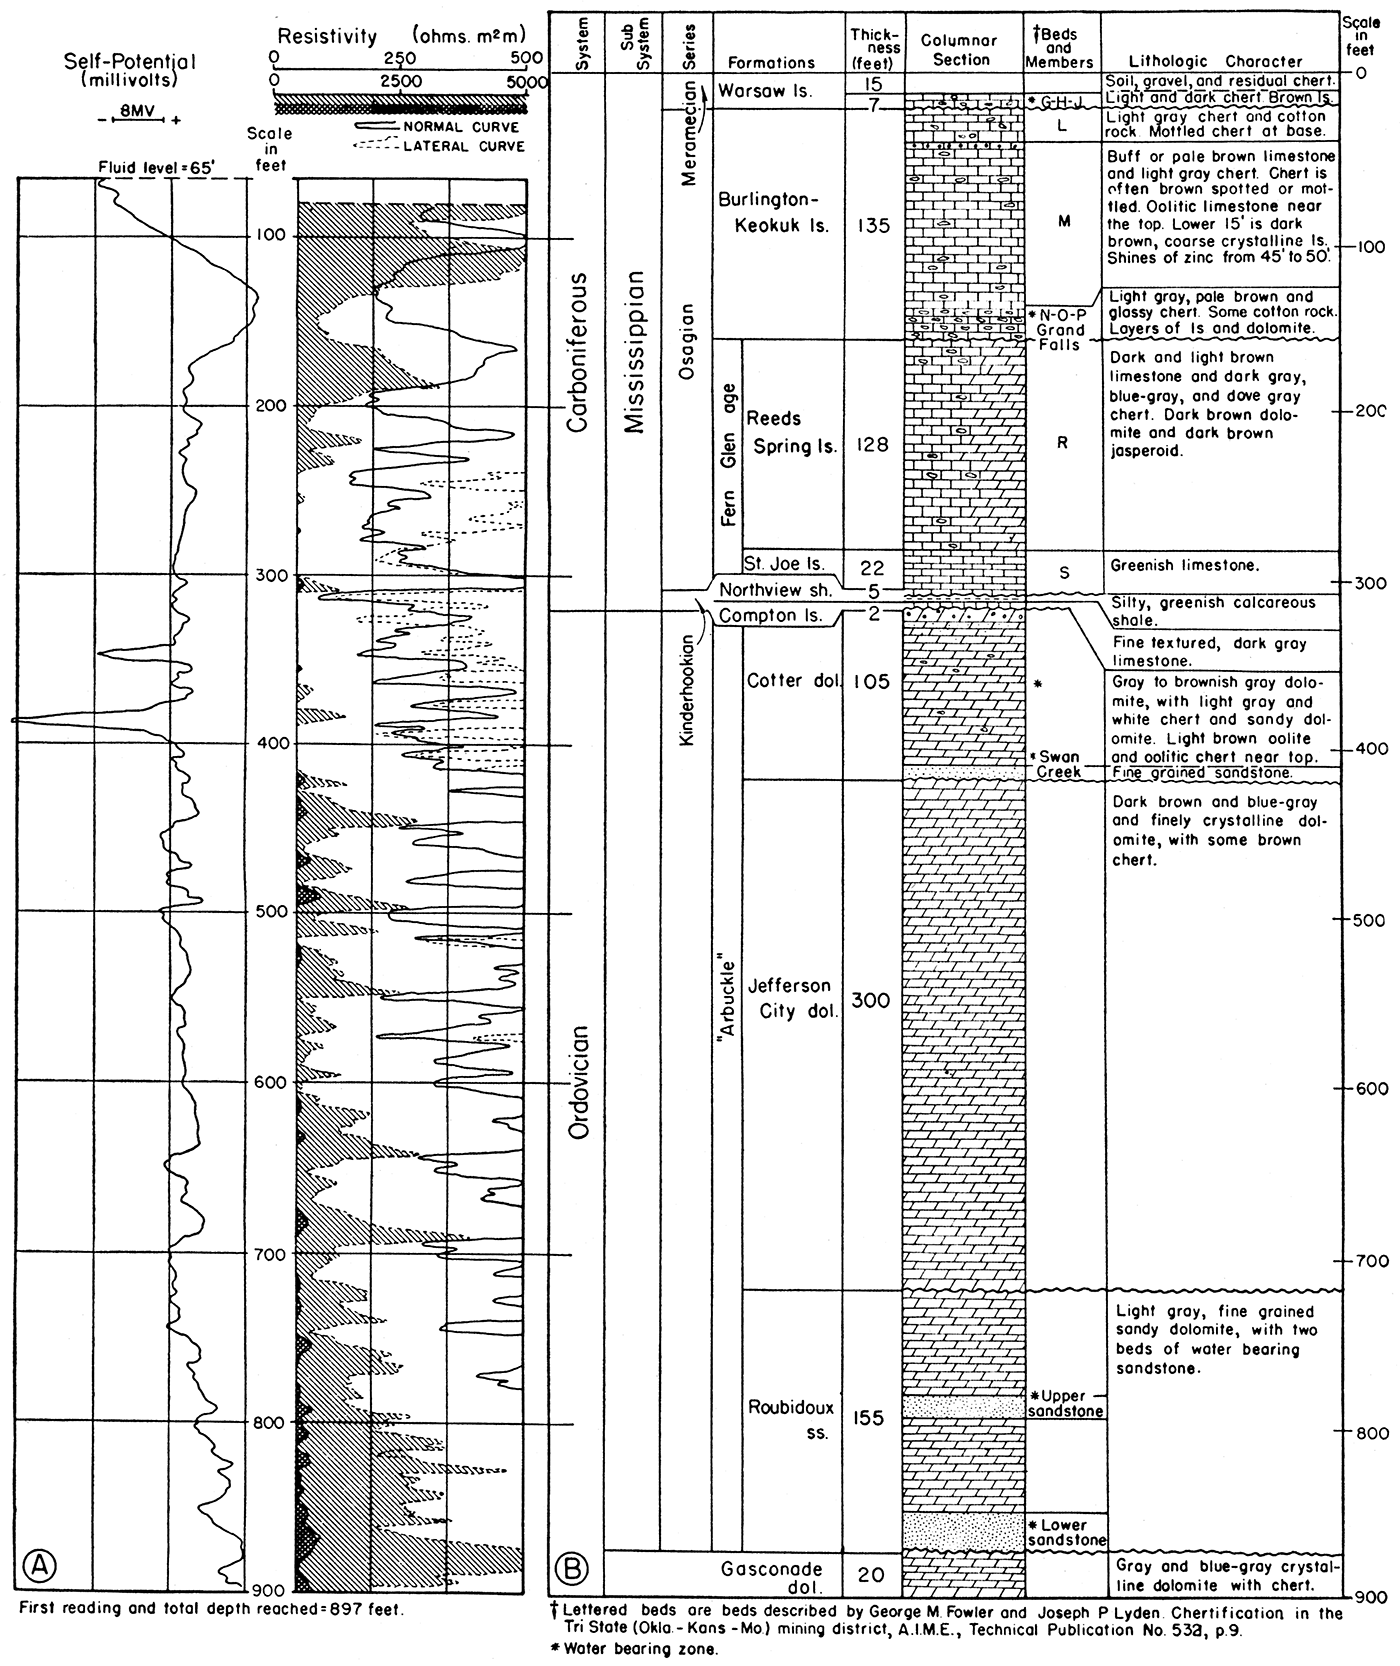 Electrical log, showing self-potential and resistivity curves. Columnar section of rocks penetrated by the Jayhawk Ordnance Works deep water well.